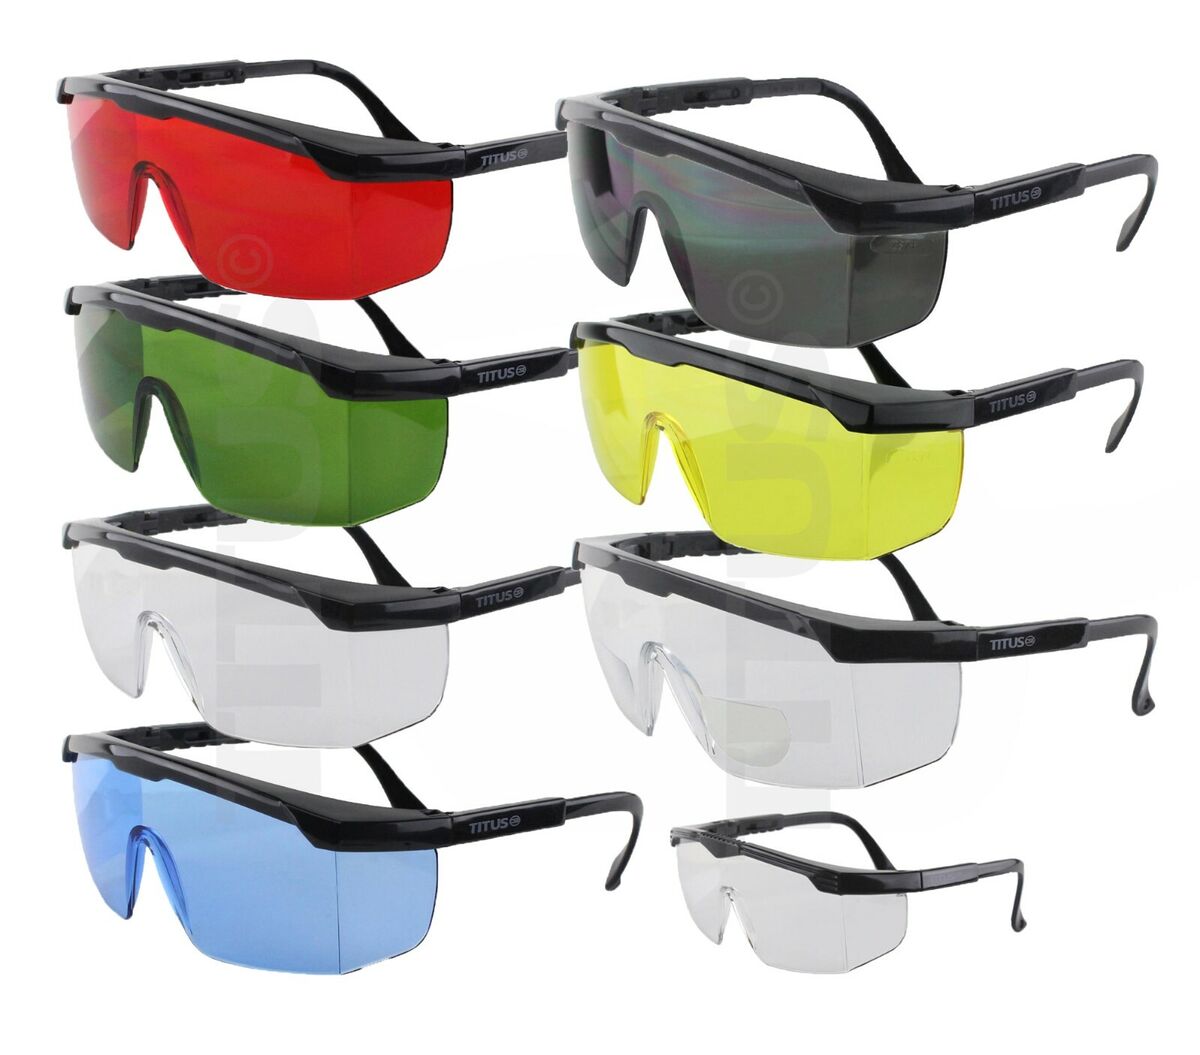 Titus G6 Safety Glasses Shooting Motorcycle Eye Protection ANSI Z87 Compliant 